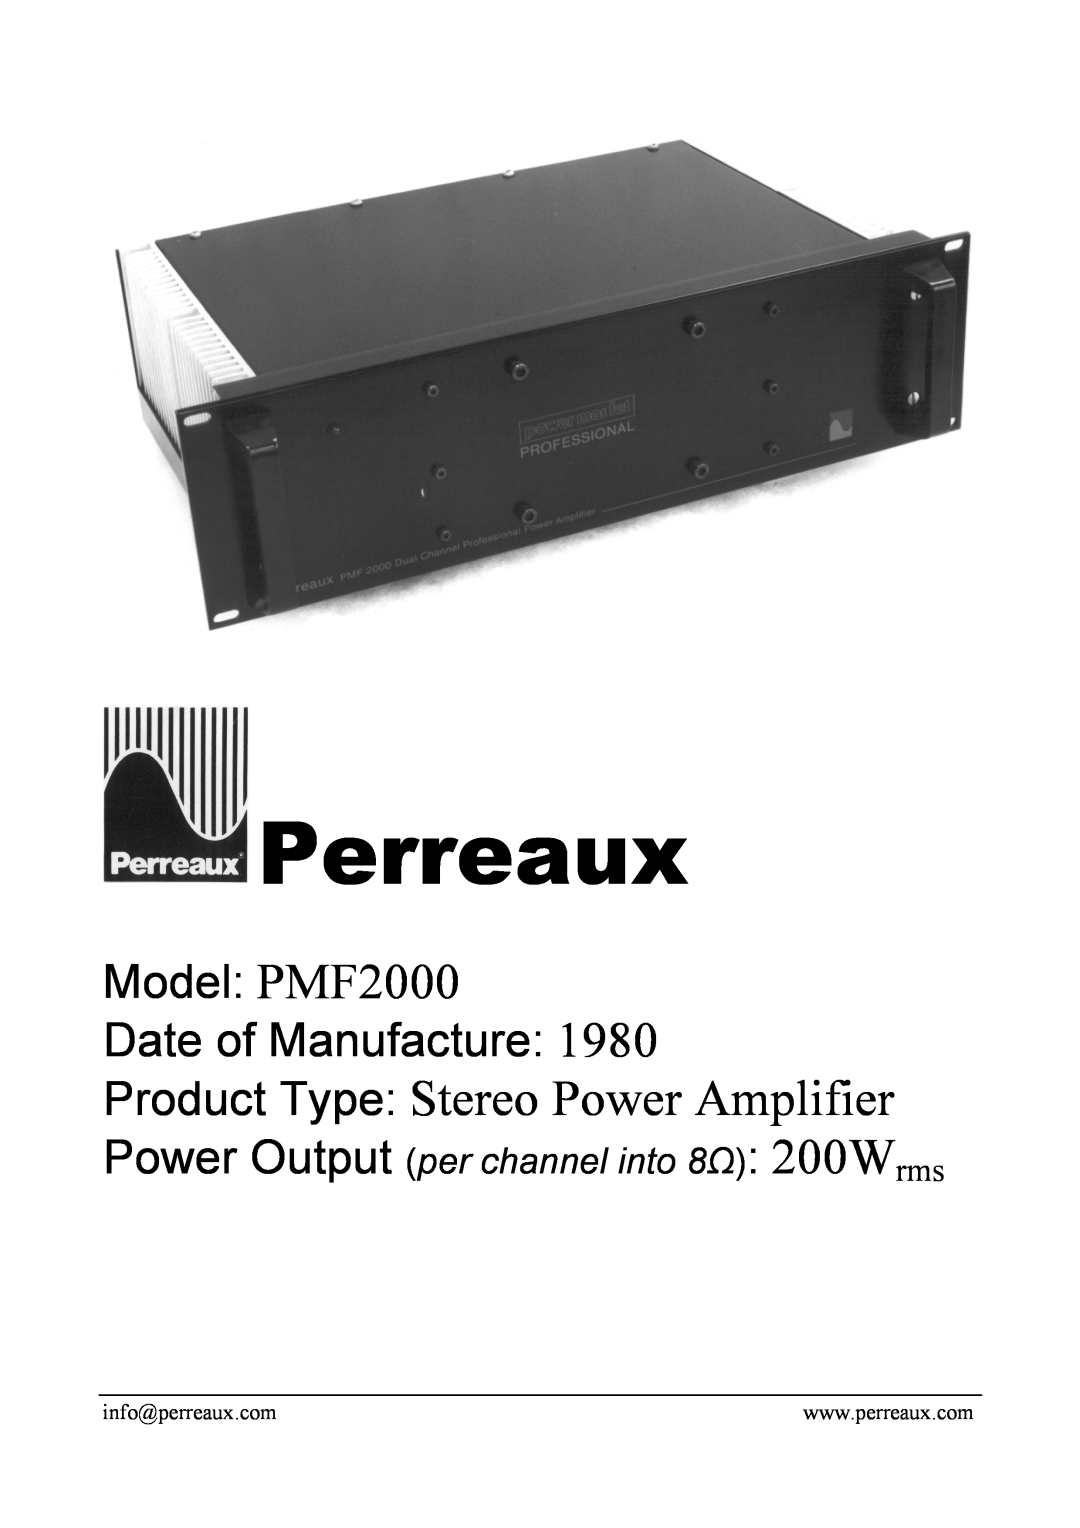 Perreaux manual Perreaux, Product Type Stereo Power Amplifier, Model PMF2000 Date of Manufacture 